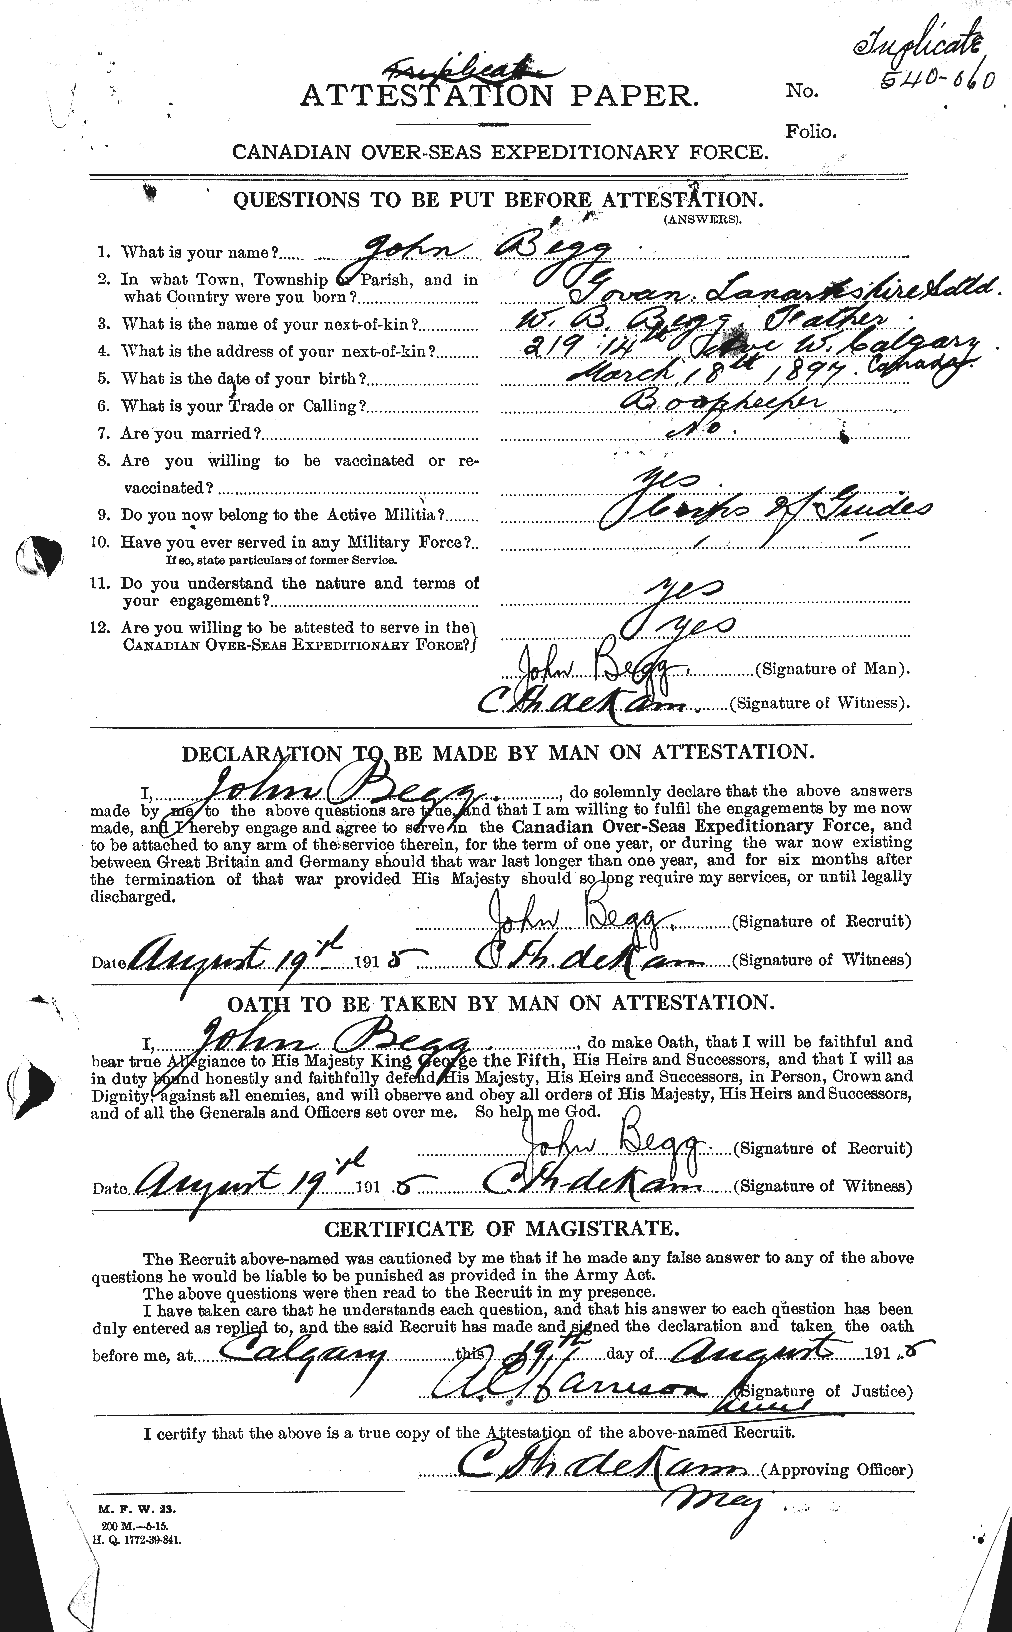 Personnel Records of the First World War - CEF 232412a